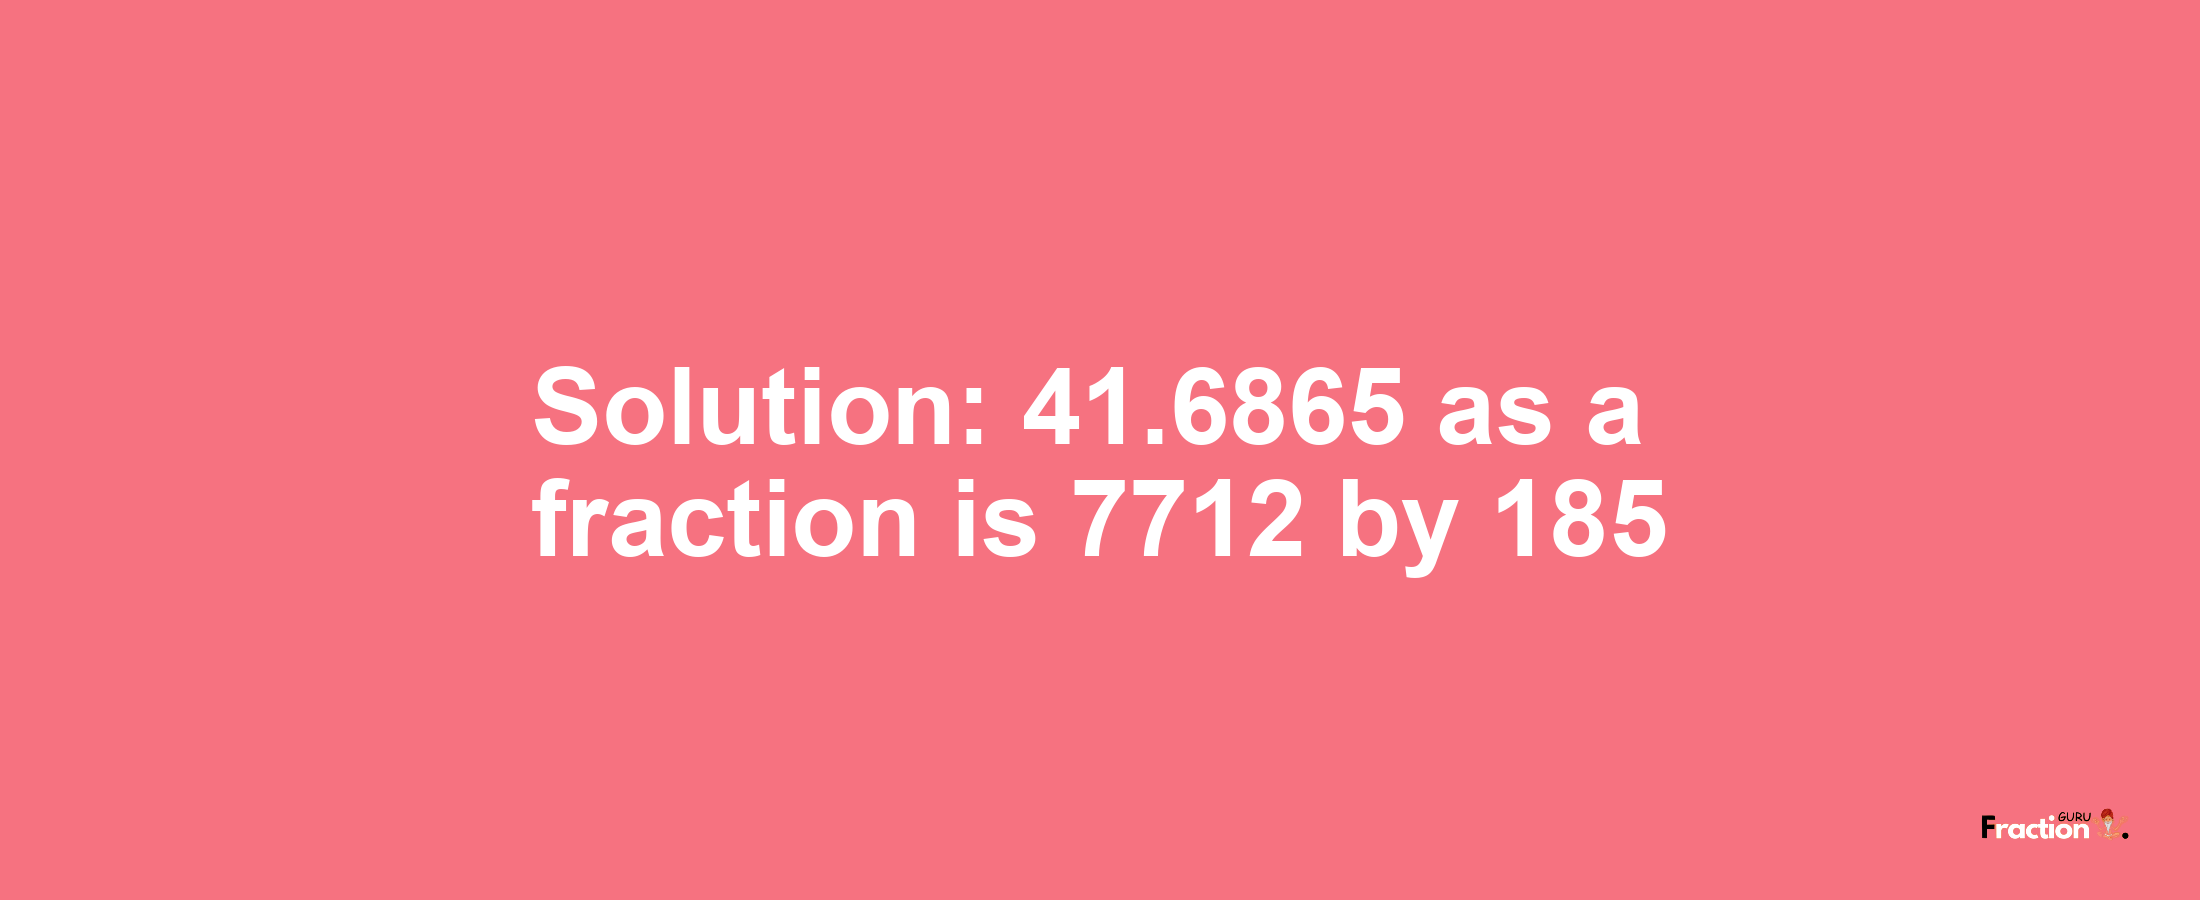 Solution:41.6865 as a fraction is 7712/185